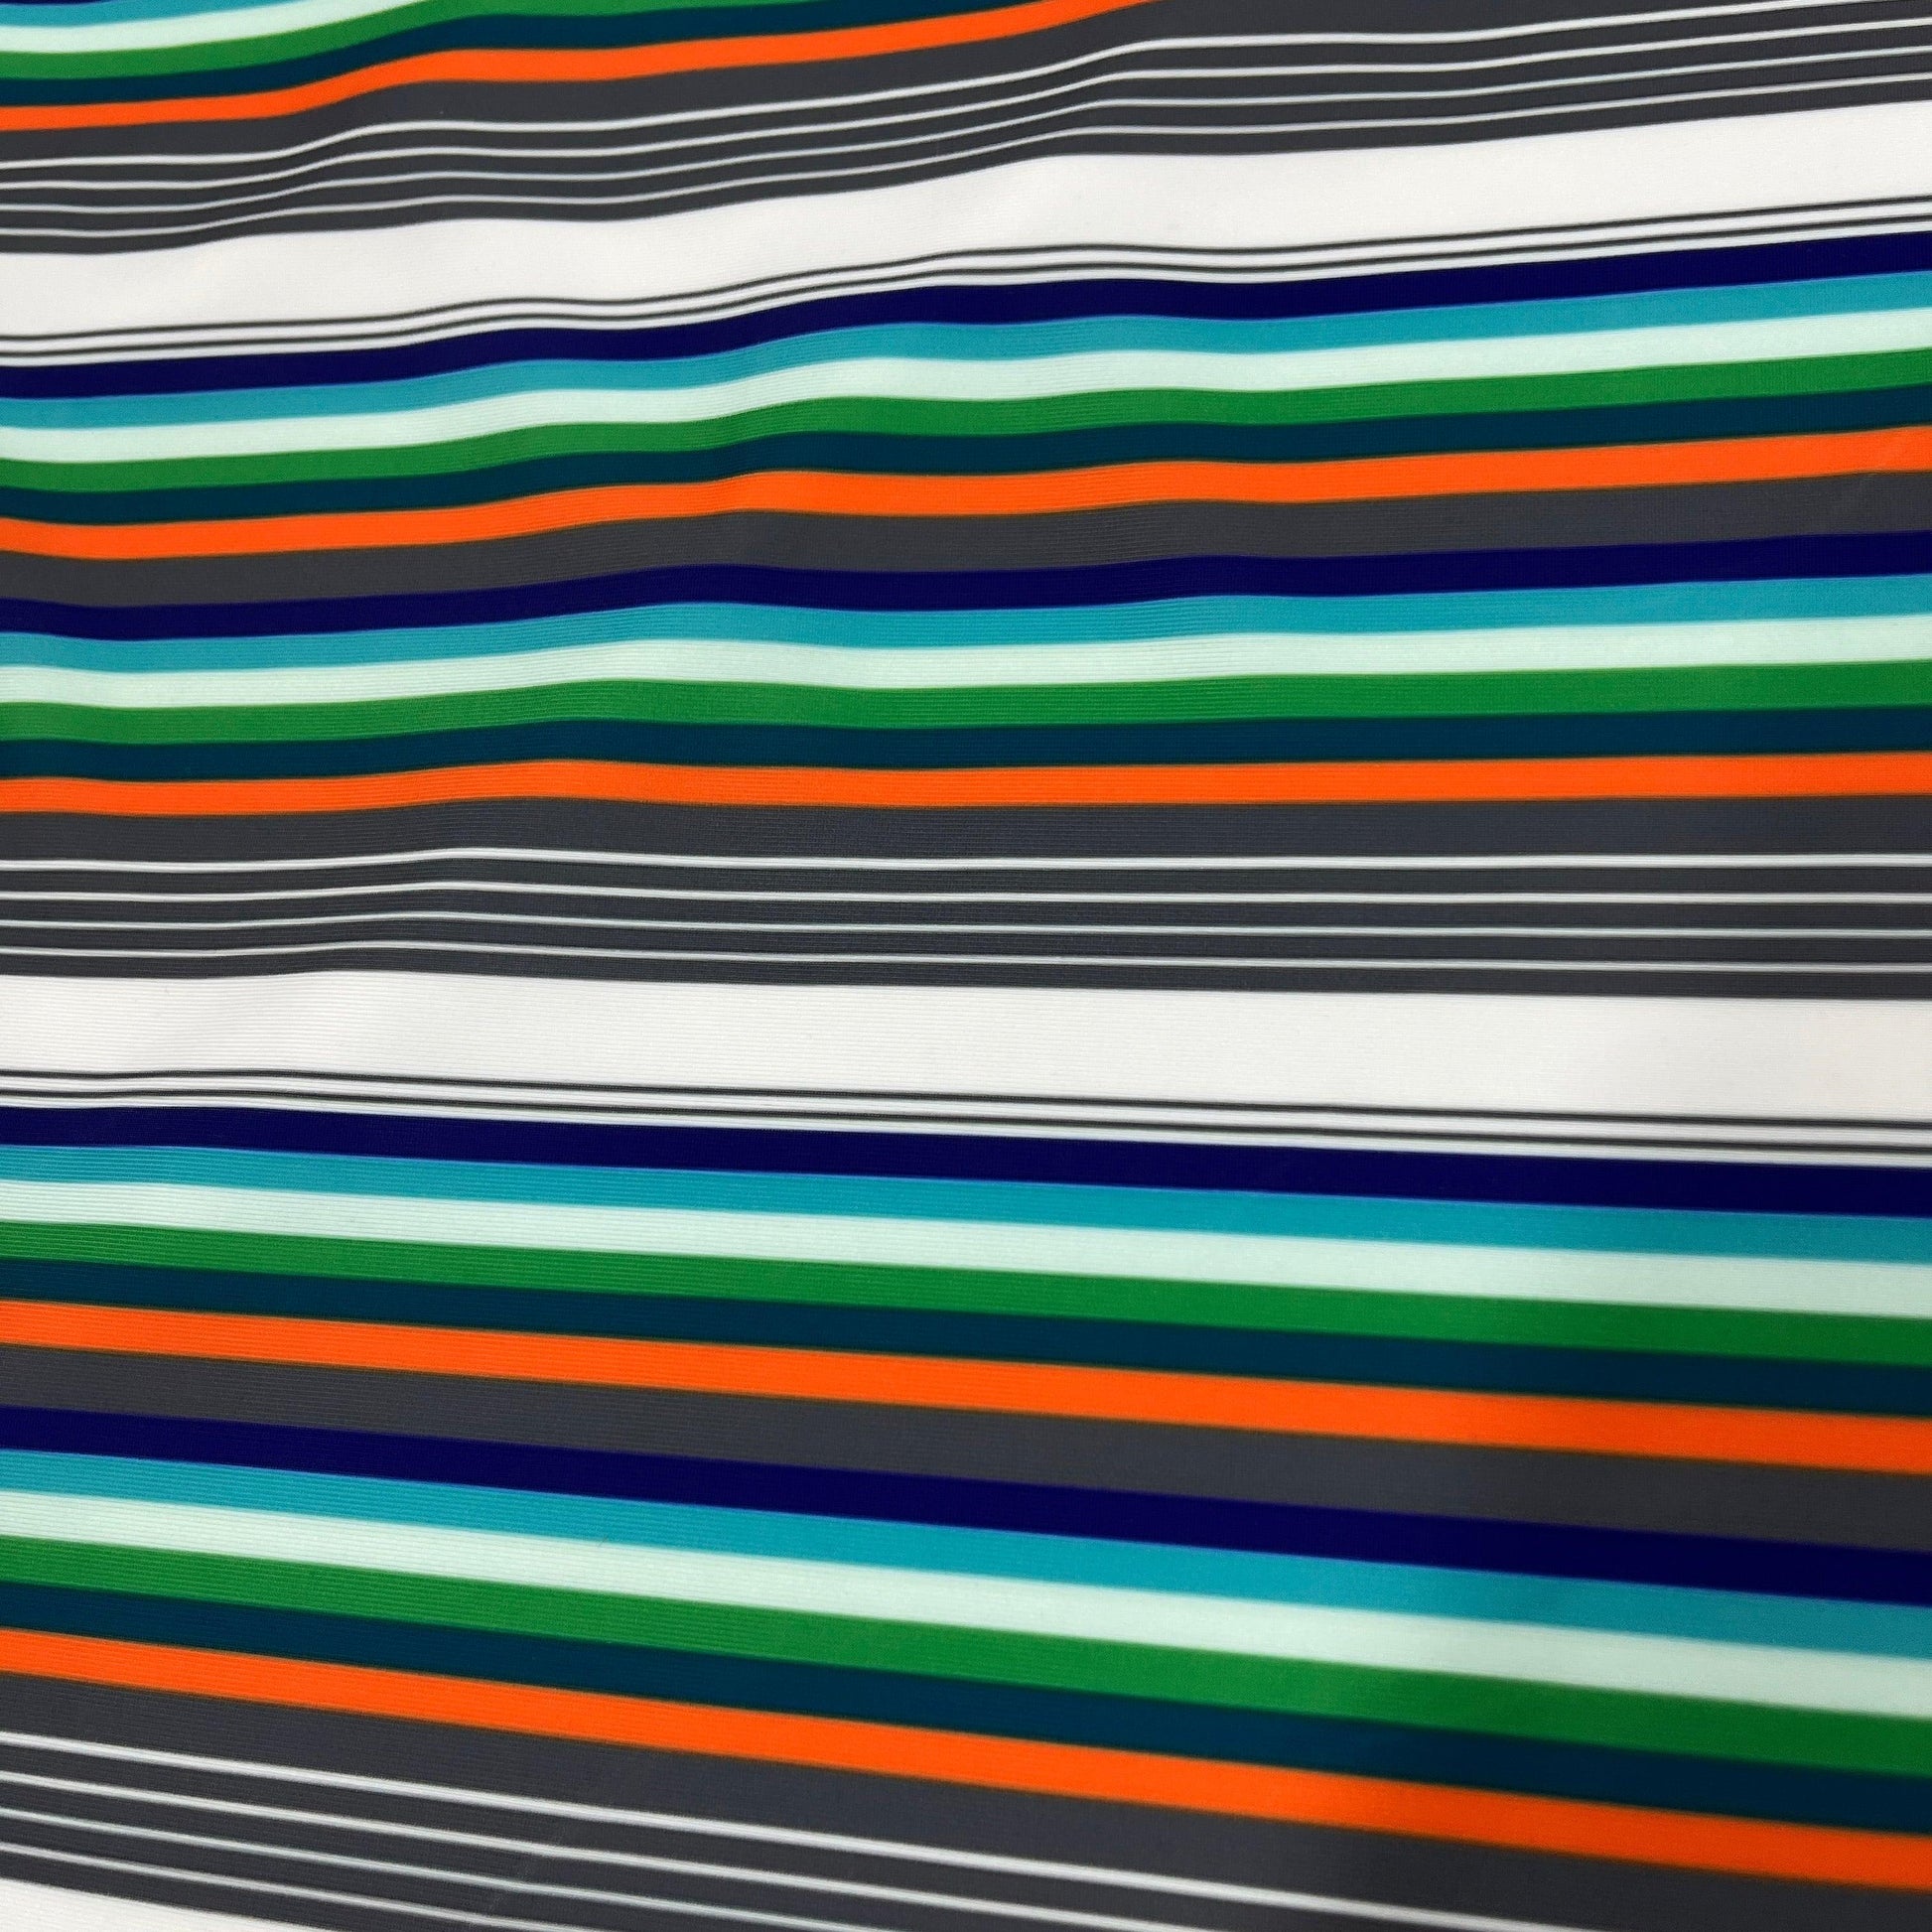 White, Orange and Green Stripes on Athletic Jersey Fabric - Nature's Fabrics